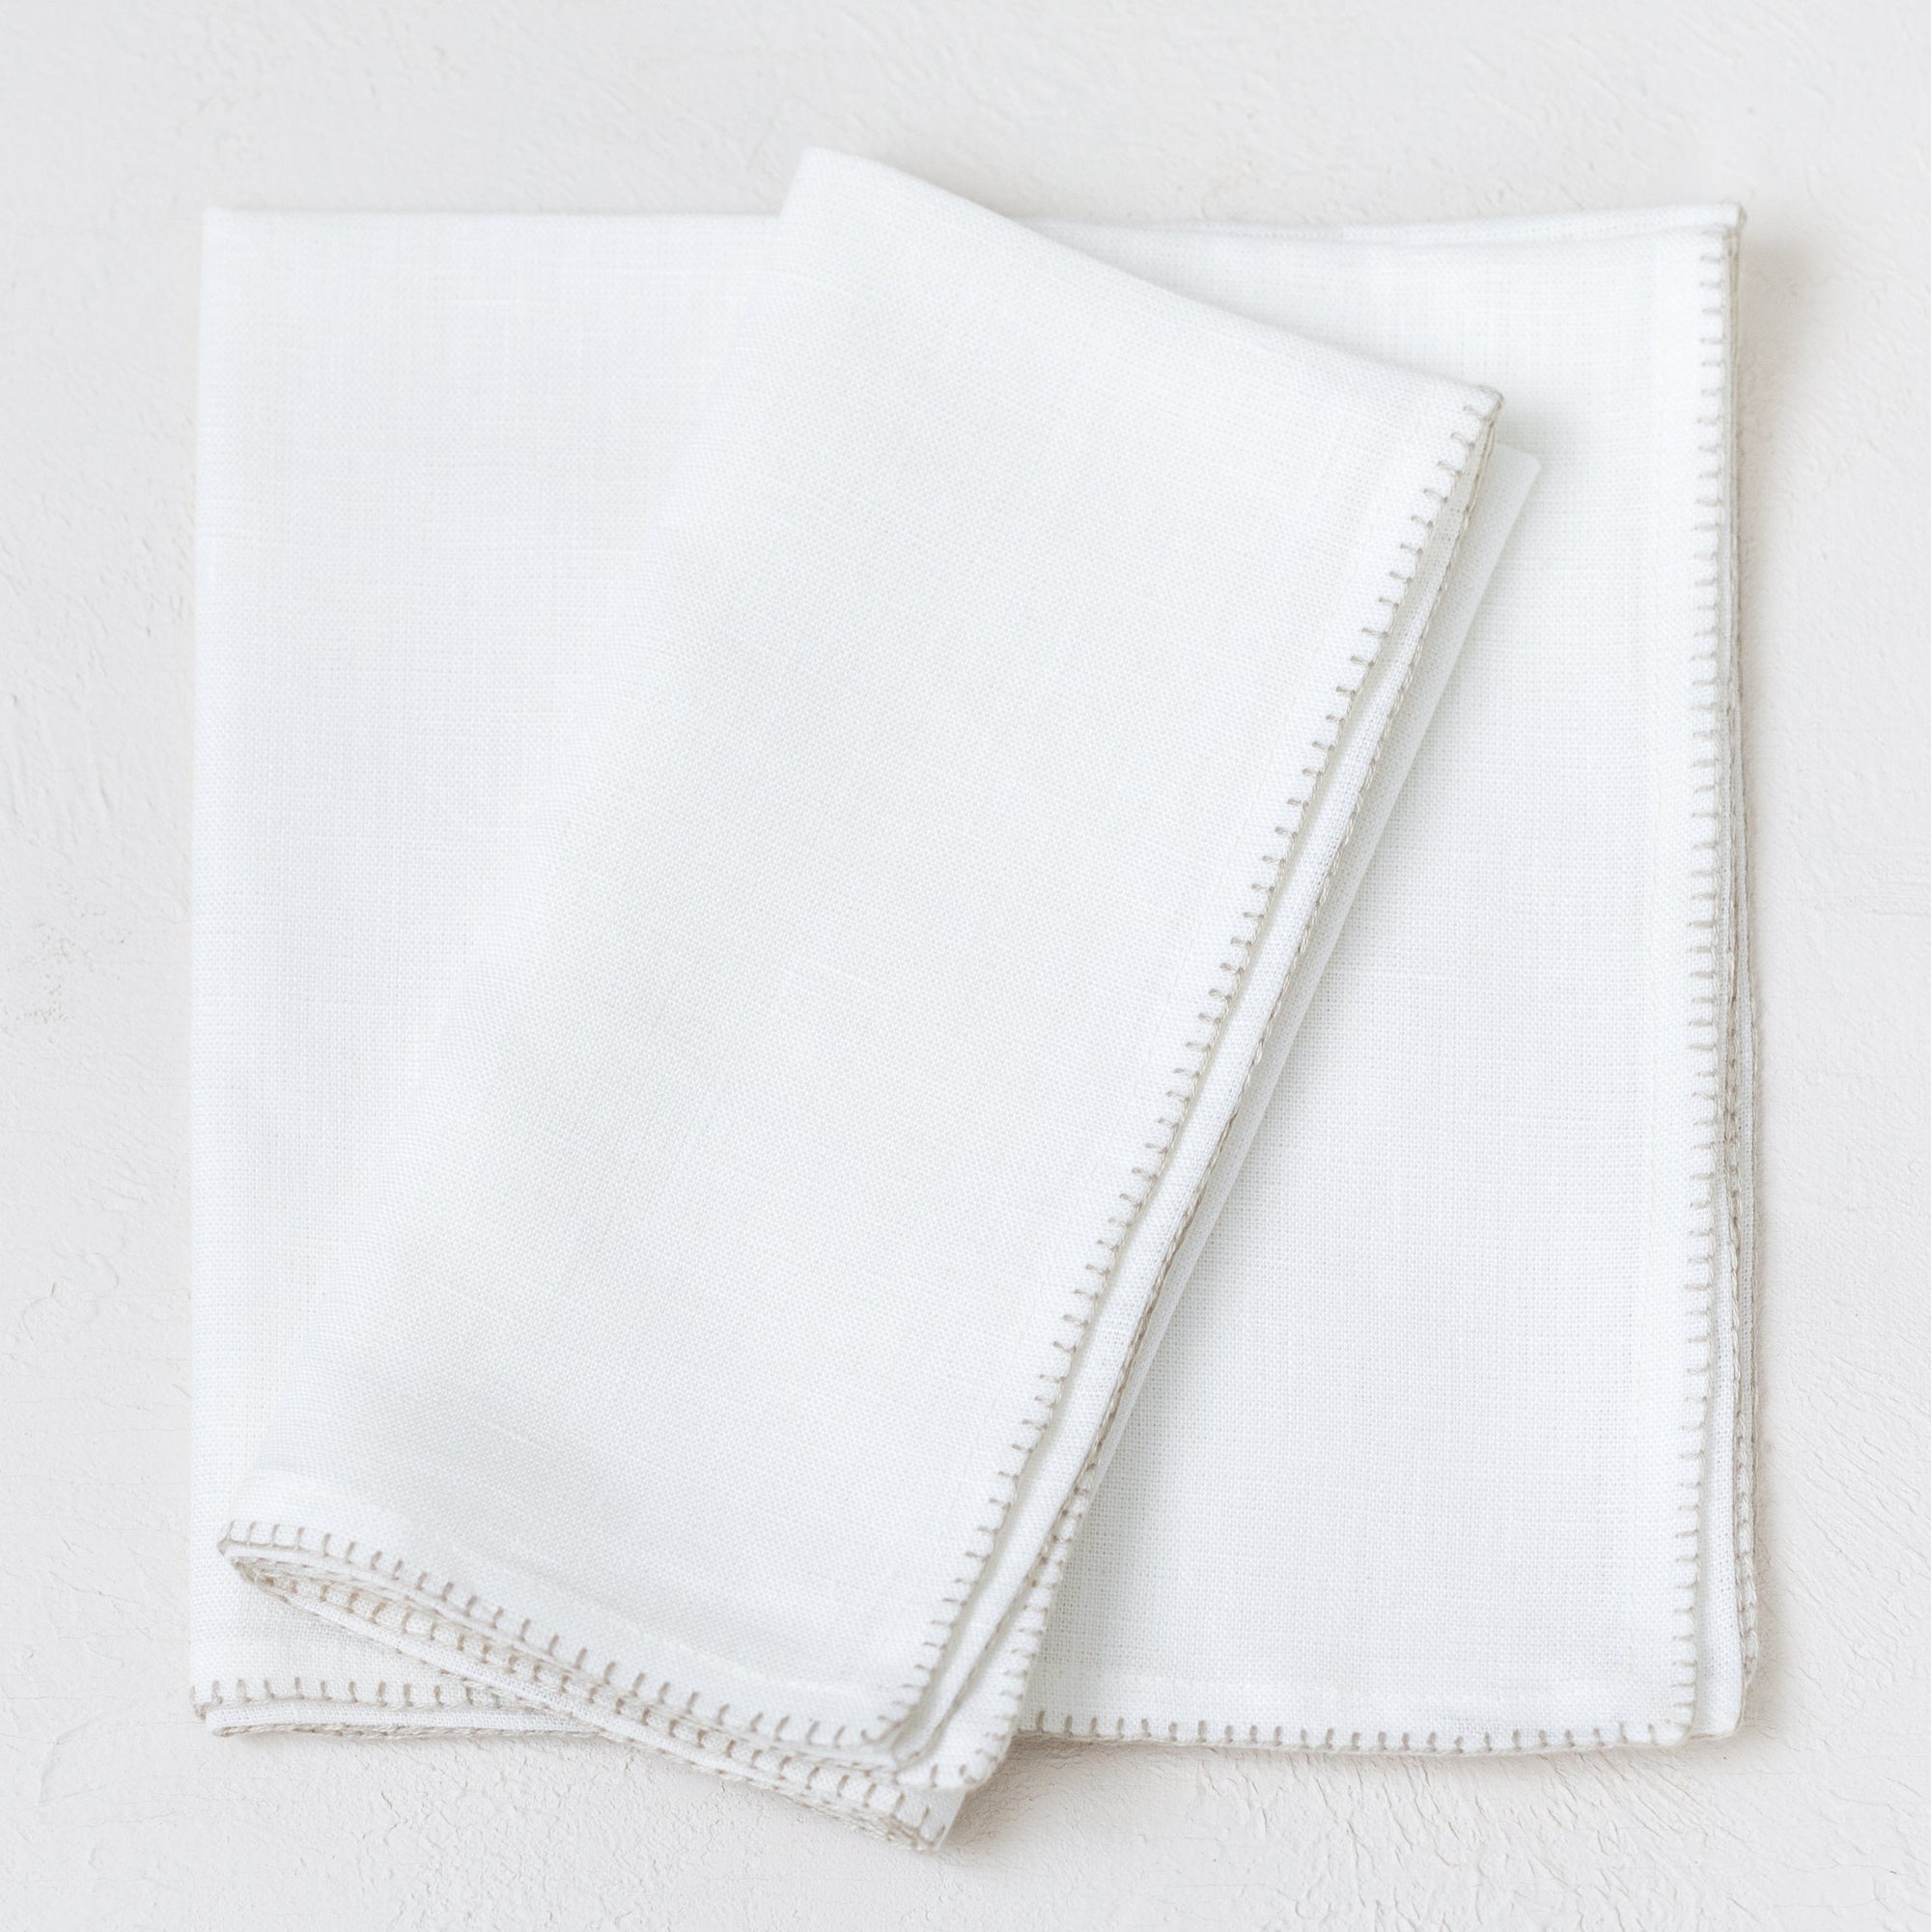 Cream Linen table napkin set from artha collections